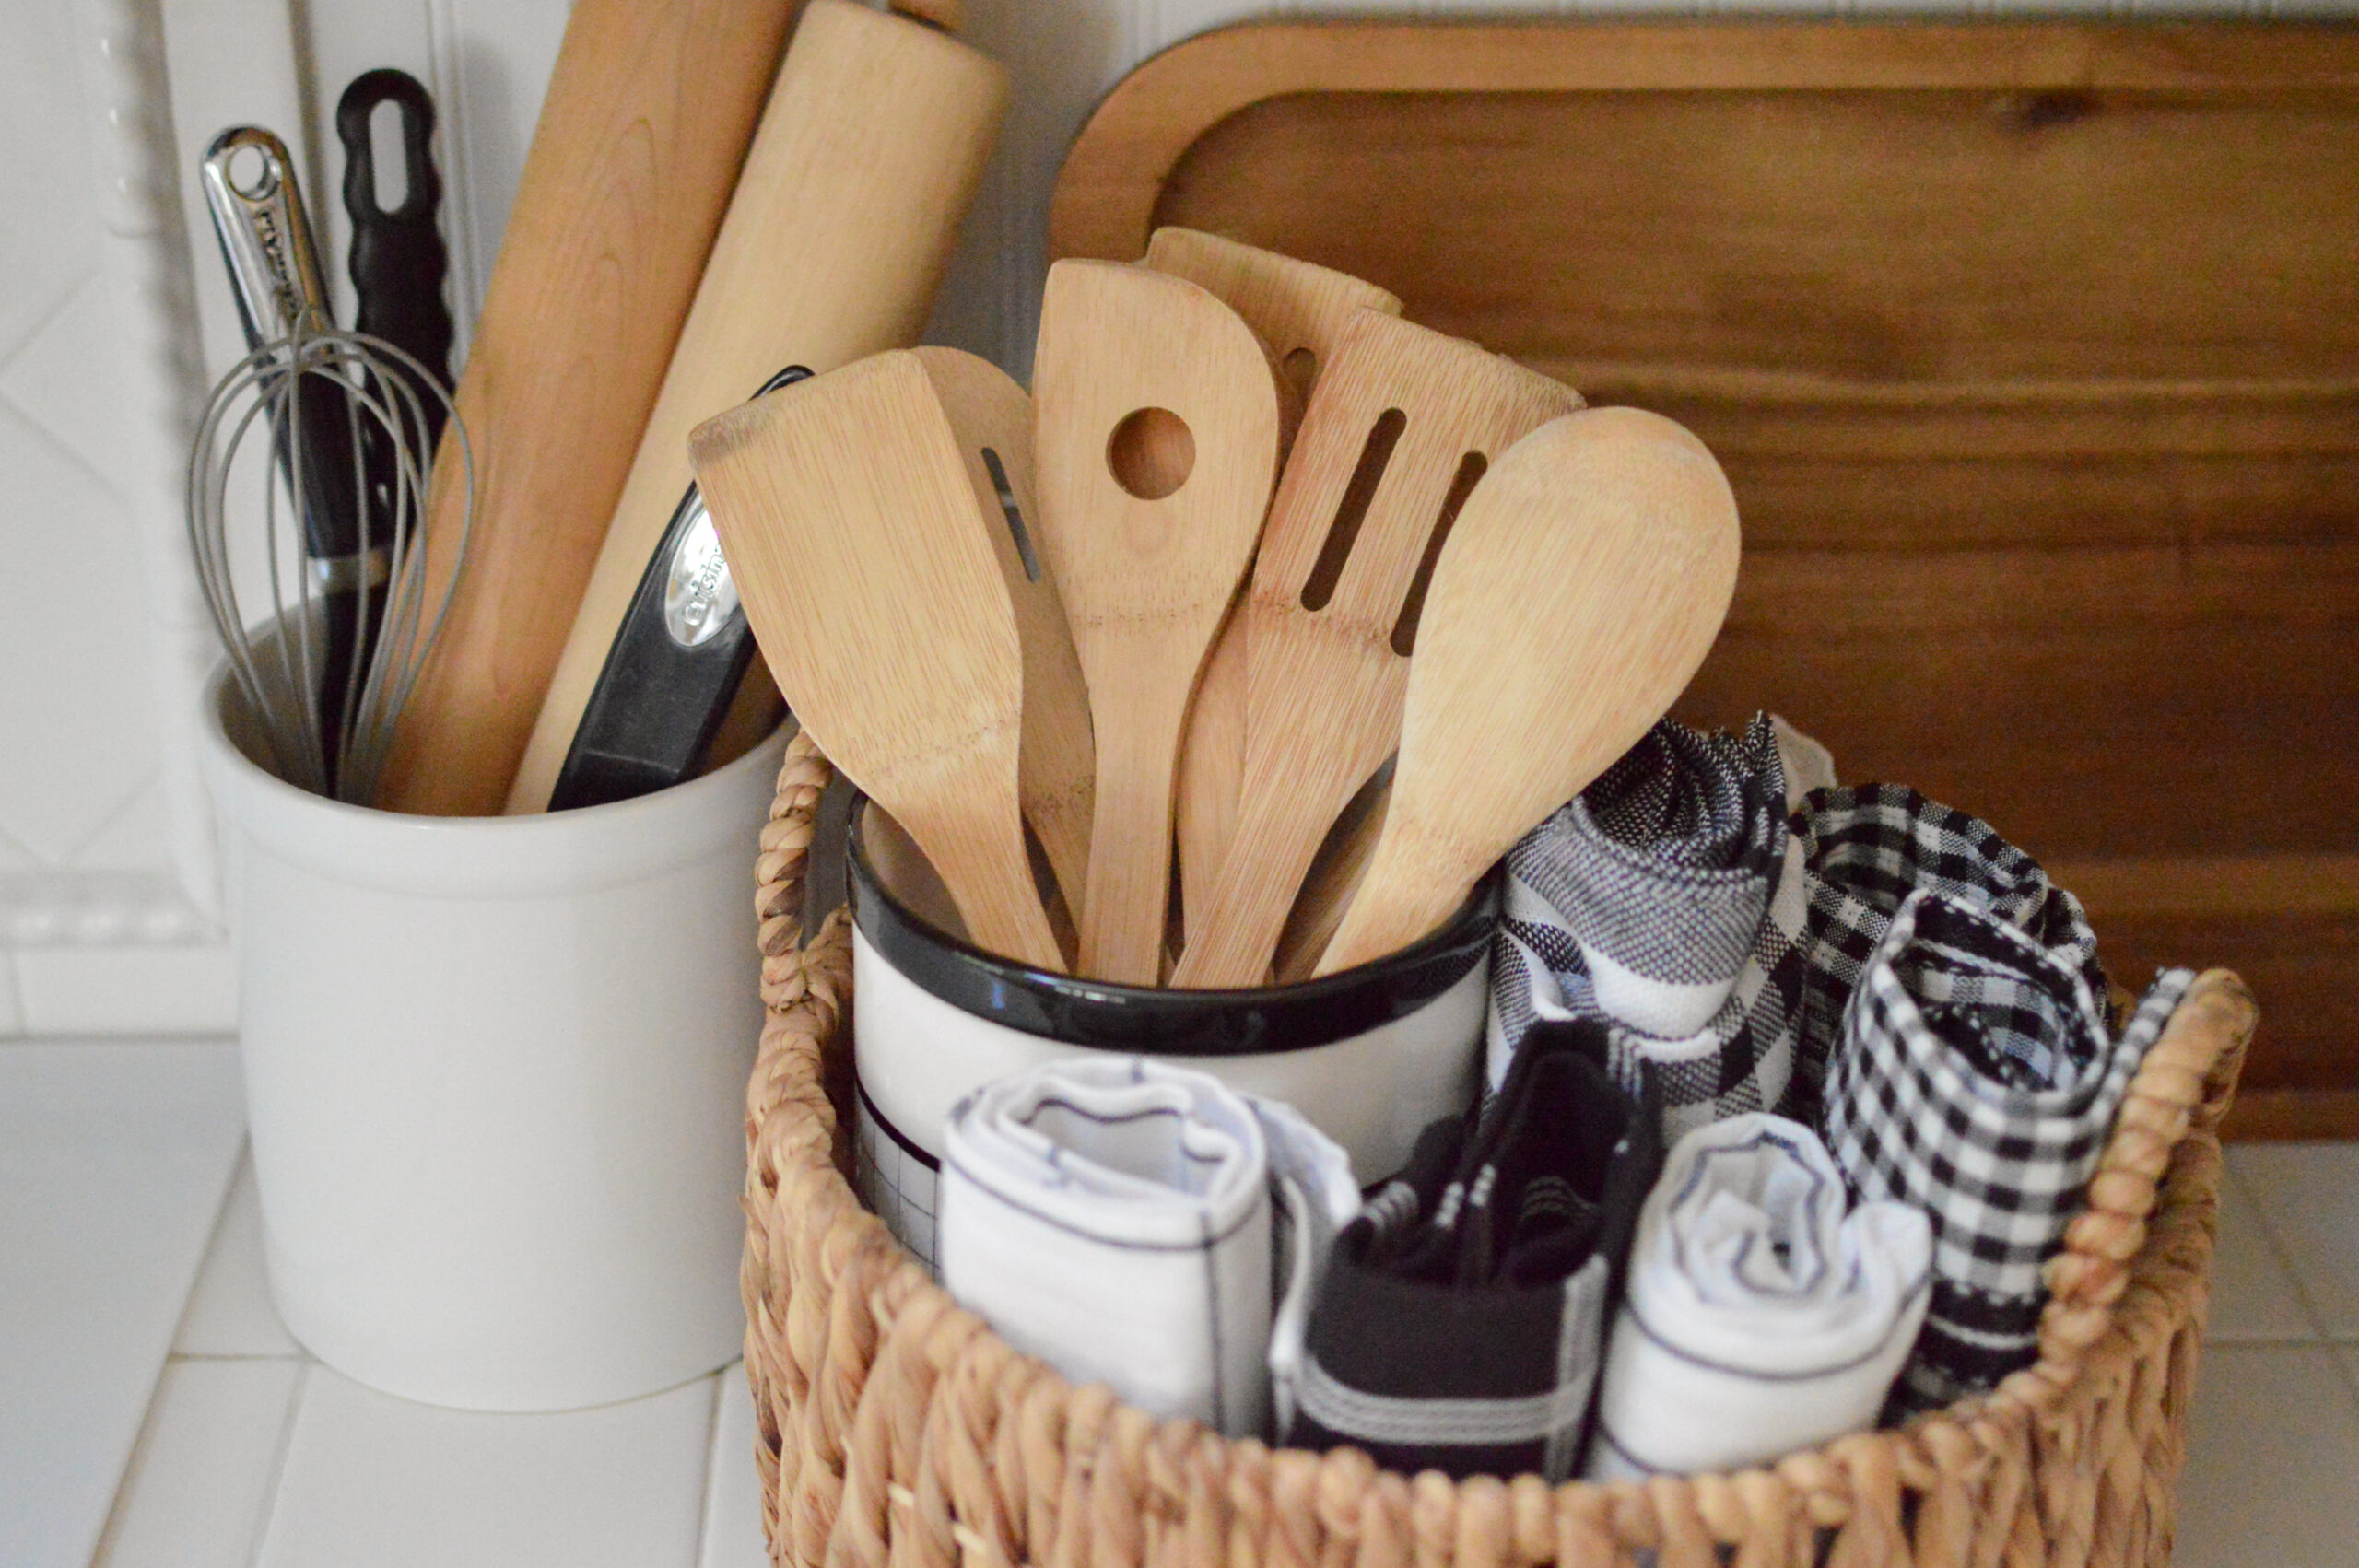 https://foxhollowcottage.com/wp-content/uploads/2021/01/Organized-Utensil-Storage-Ideas-Month-long-weekly-Cleaning-Organizing-event-with-Free-Printable-checklist-www.foxhollowcottage-35-scaled.jpg